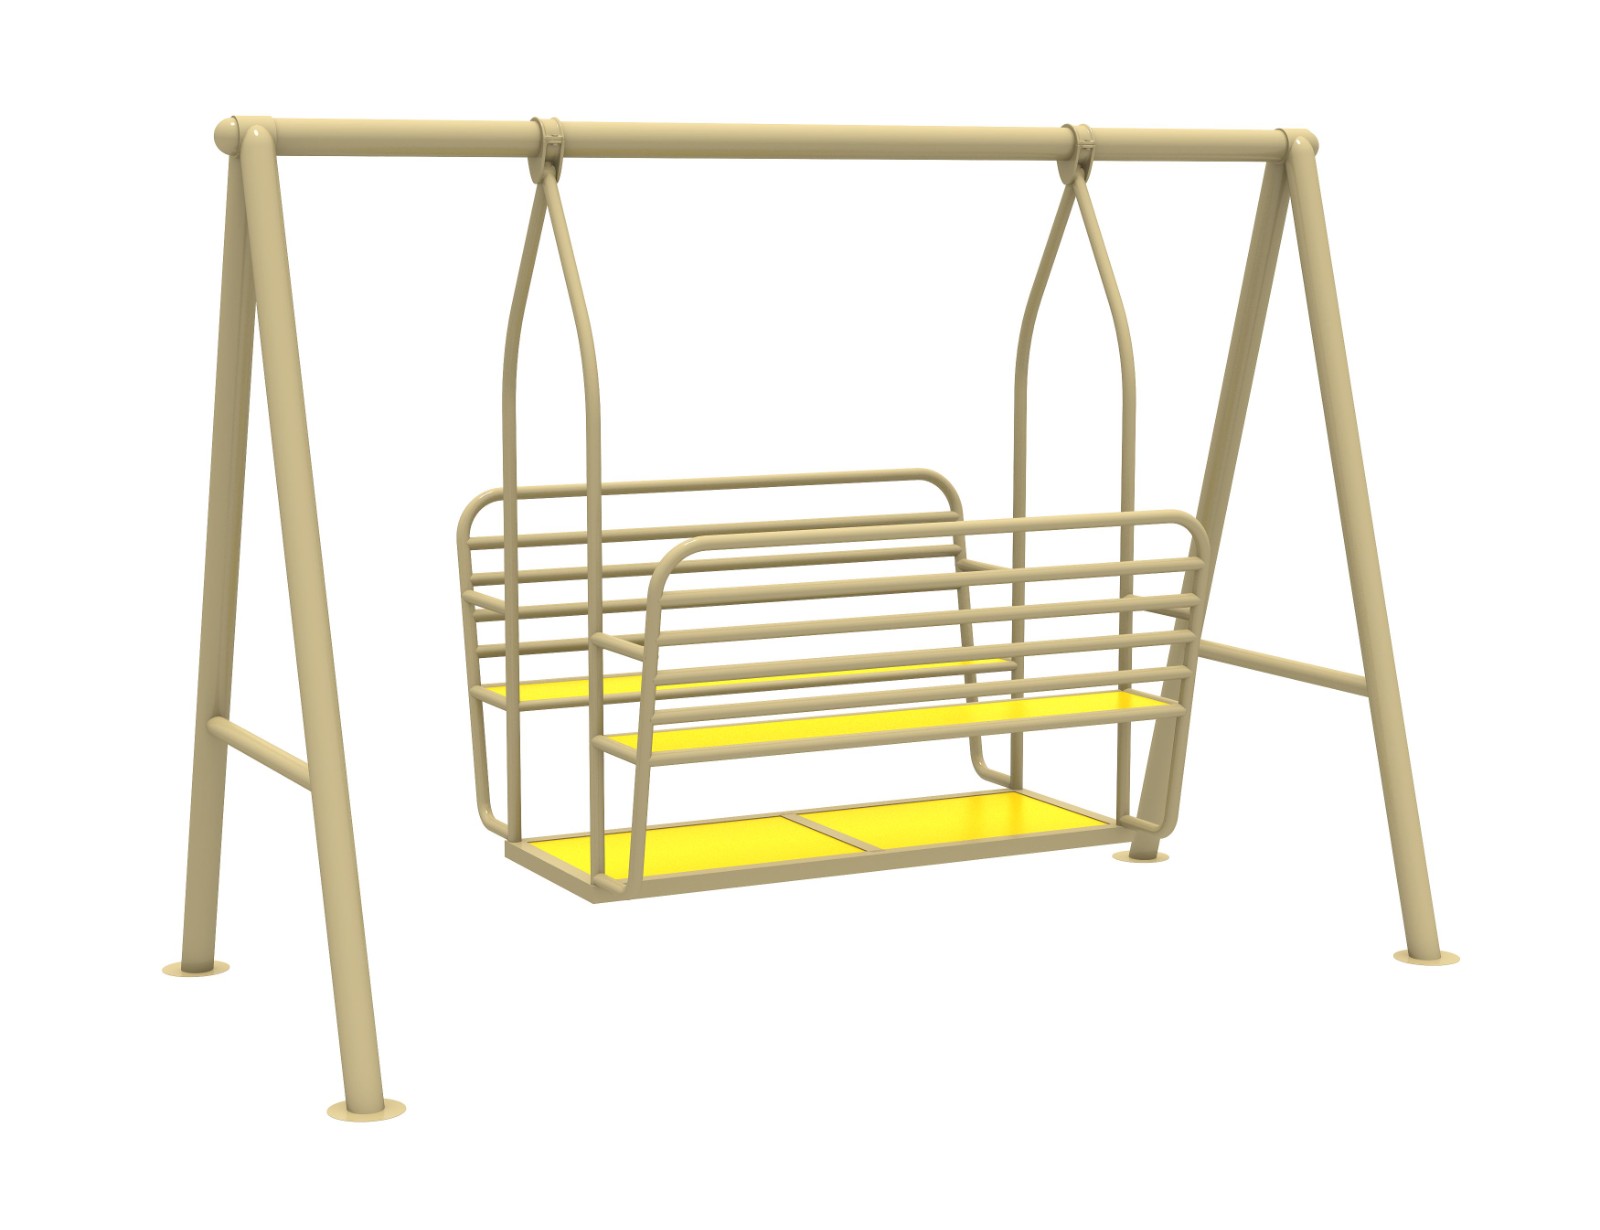 Outdoor play swing sets